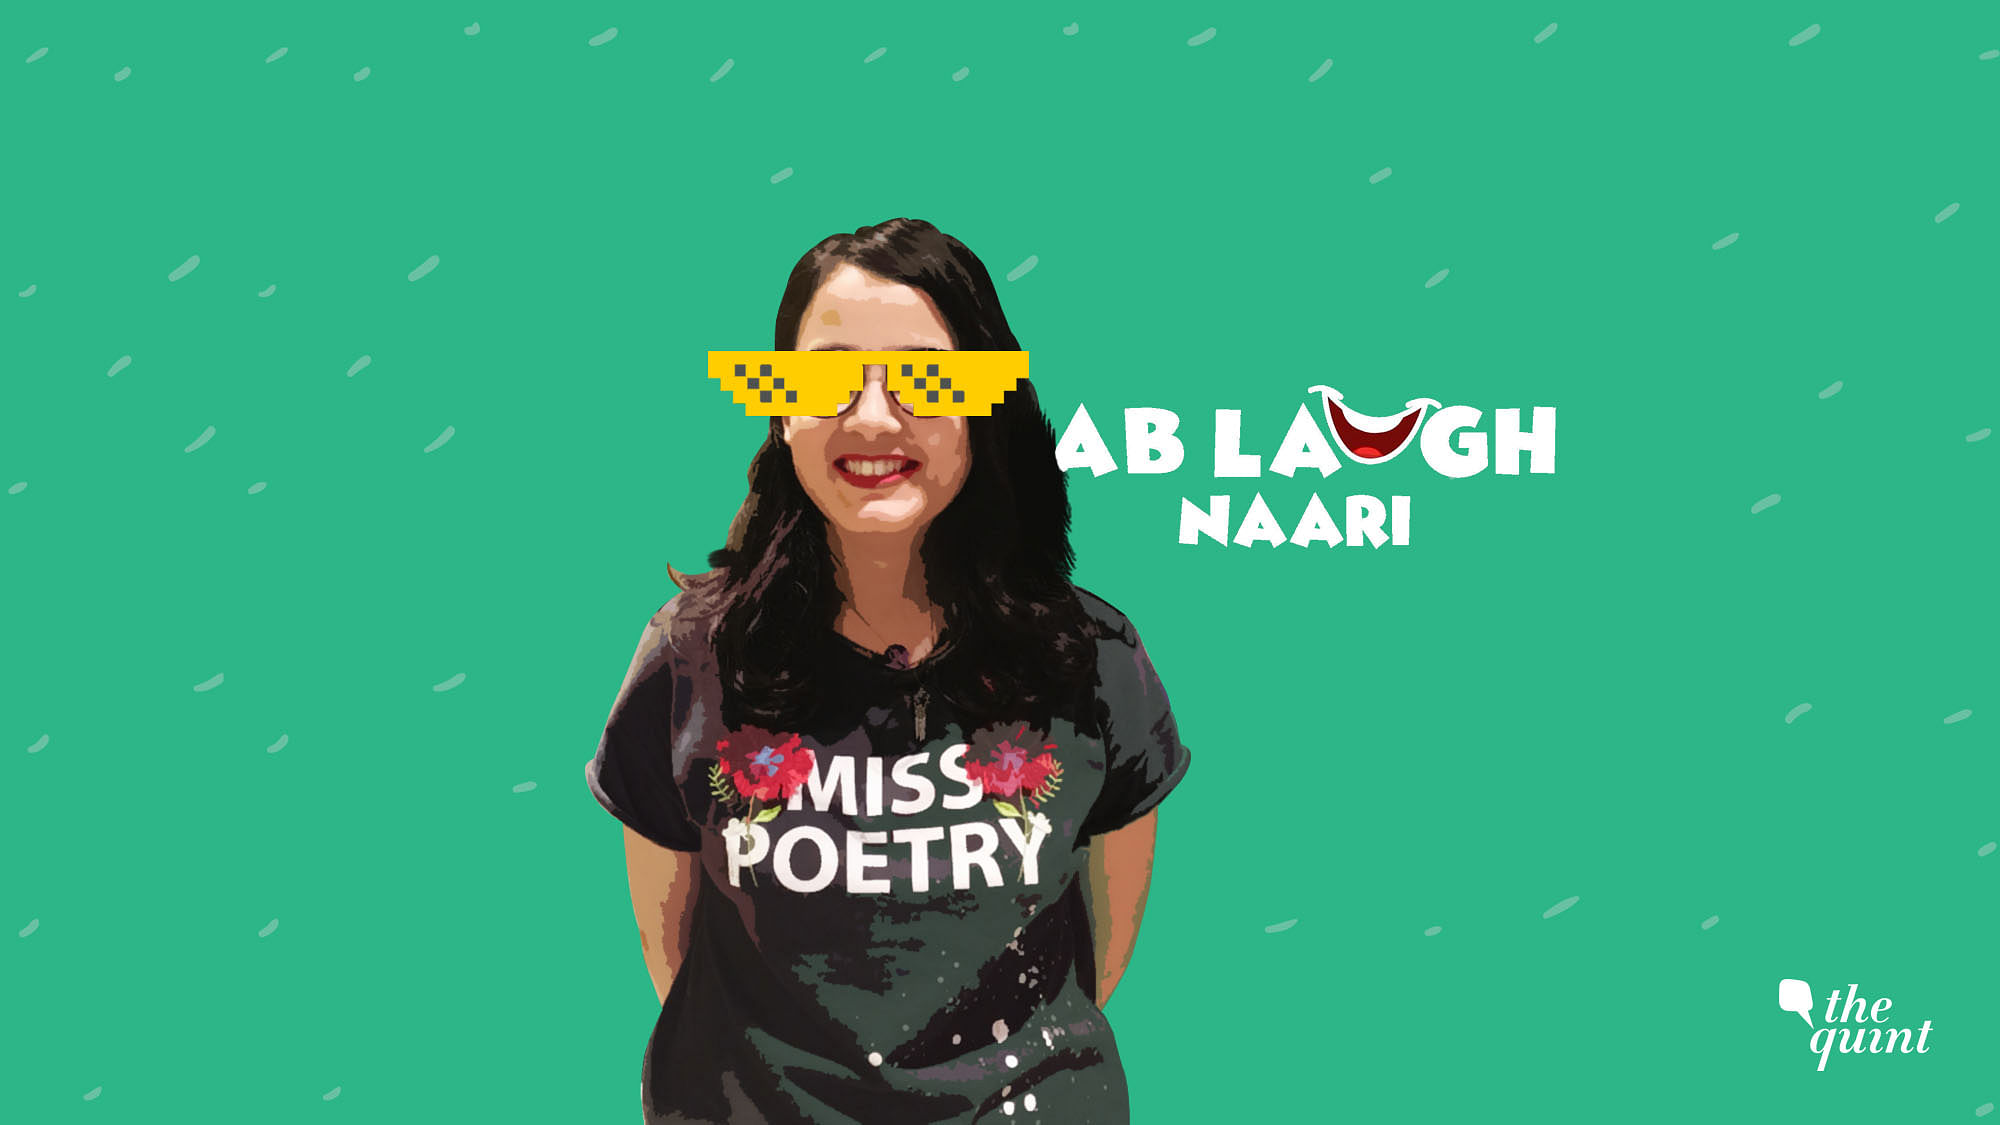 This Women’s Day, laugh off the stereotypes, with <b>The Quint</b>’s ‘Ab Laugh Naari’ campaign.